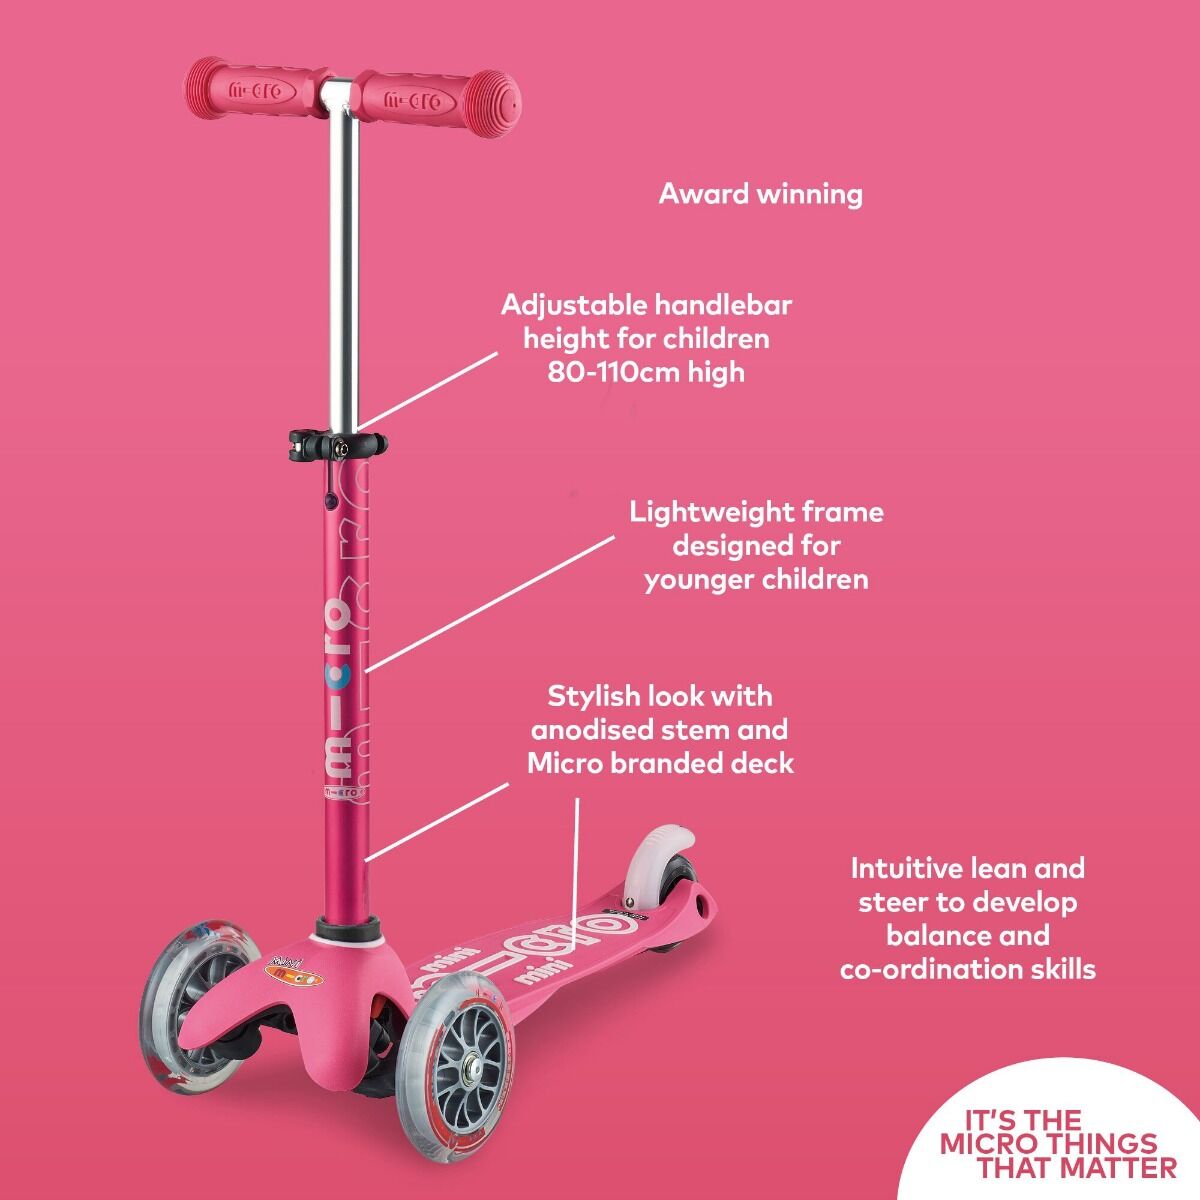 pink mini scooter